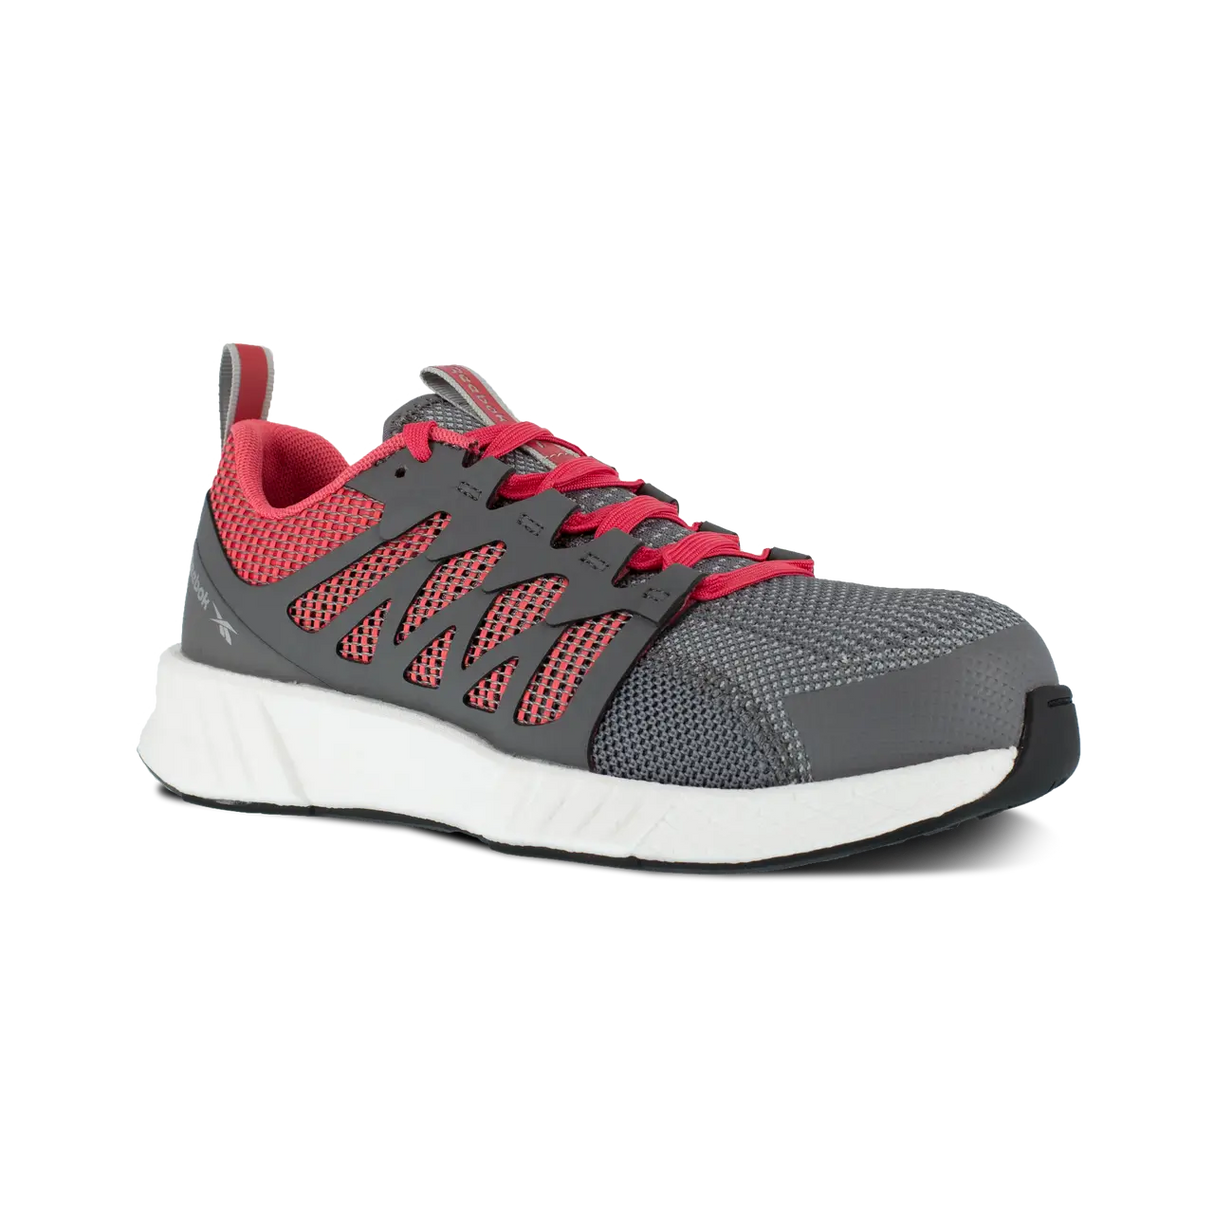 Reebok Women's Fusion Flexweave Comp Toe Grey And Pink RB312 Details